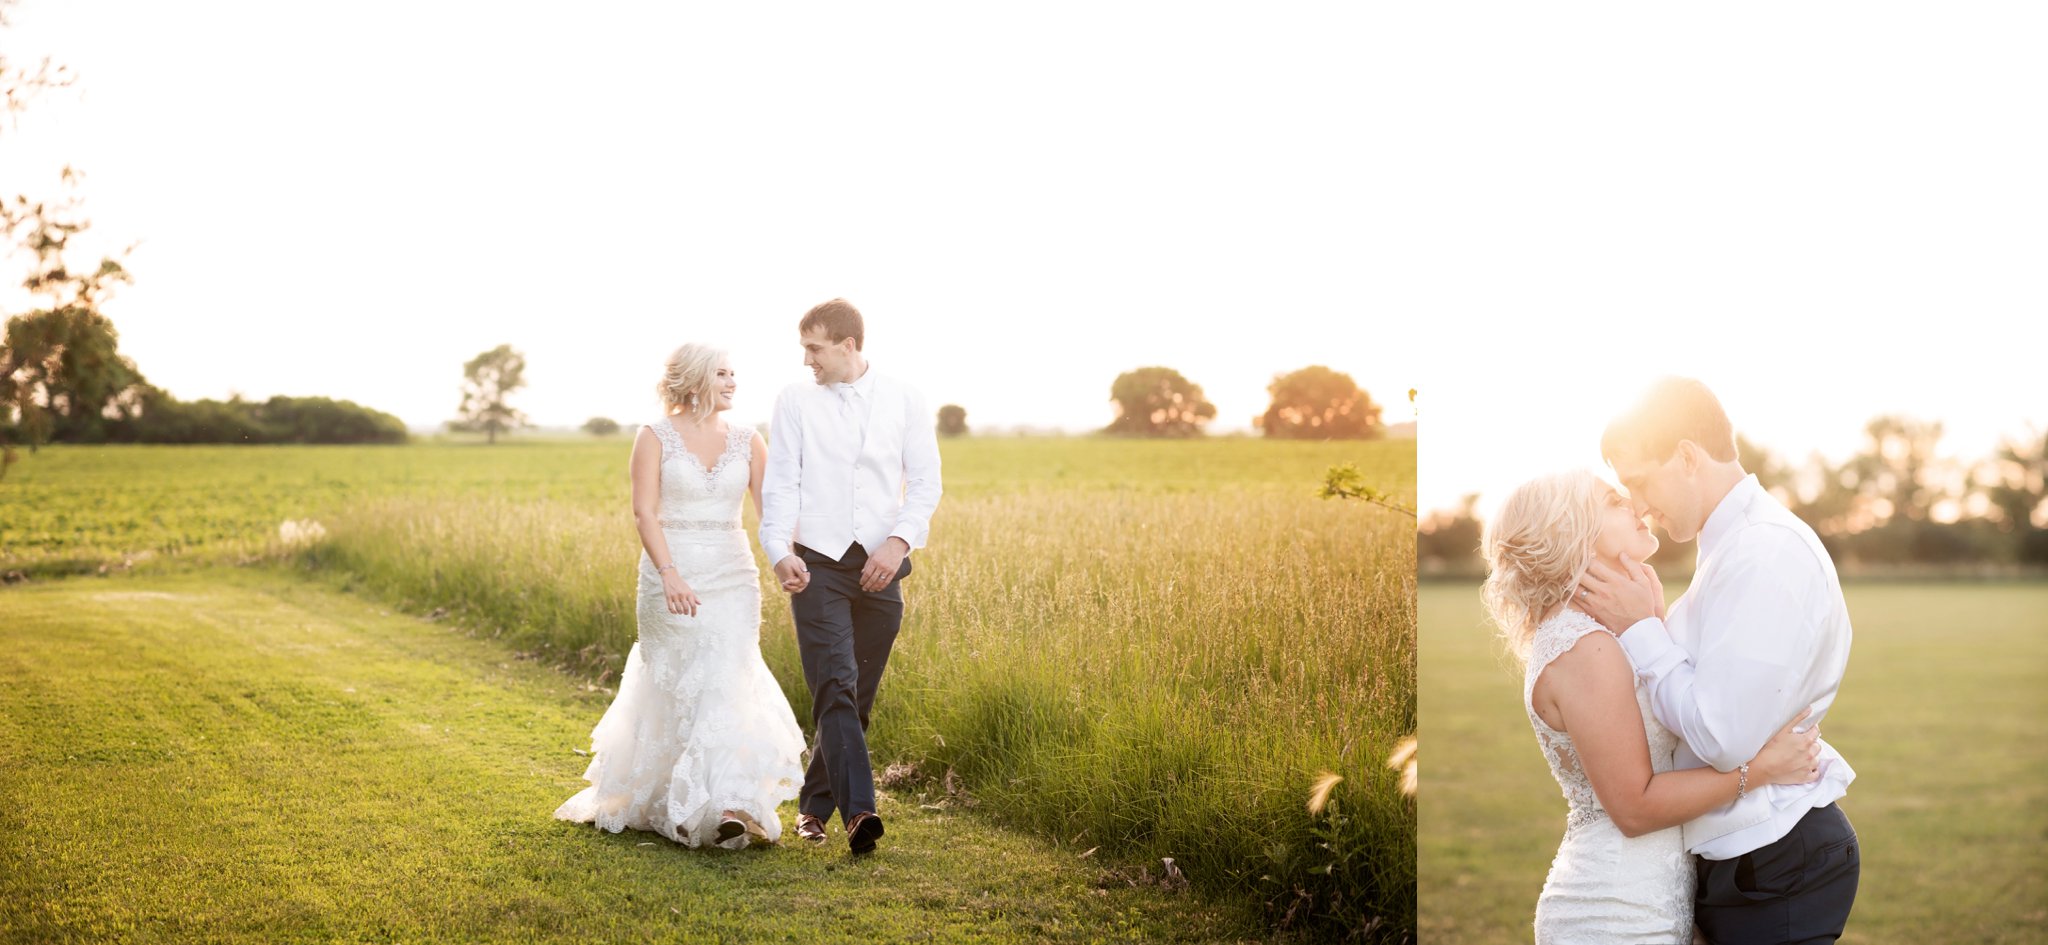 bride and groom walk through field together holding hands